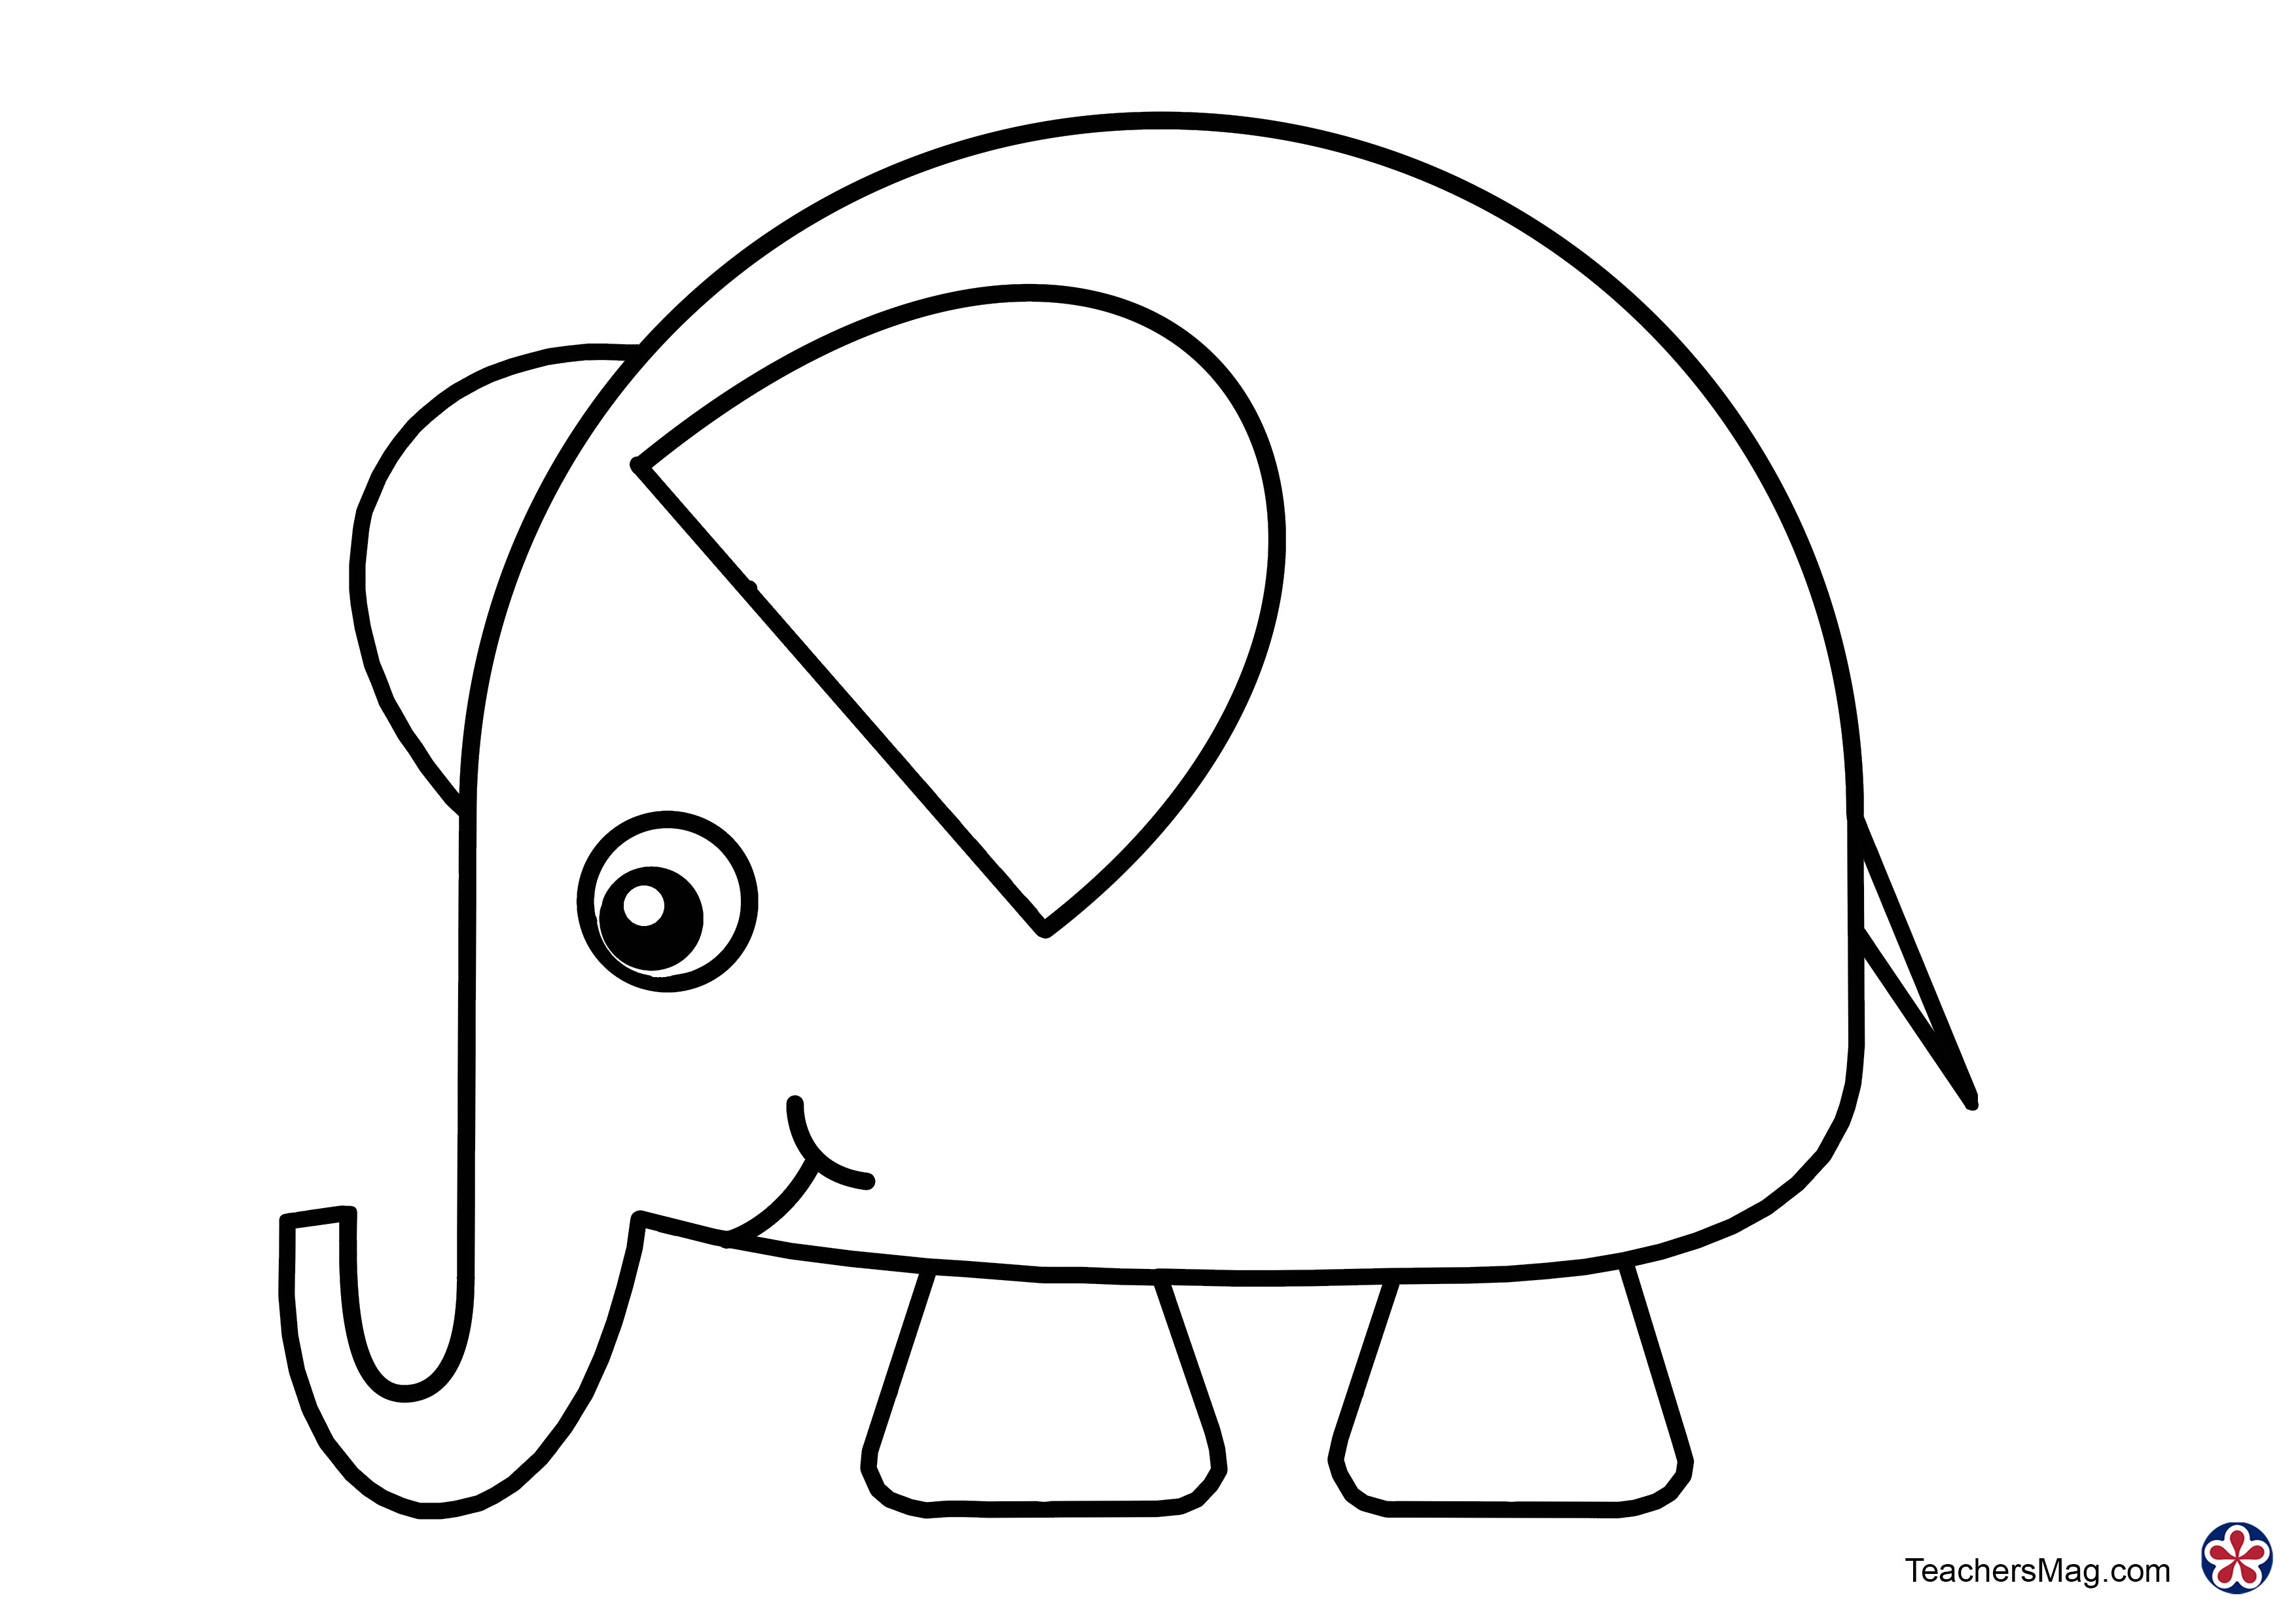 elmer elephant coloring page